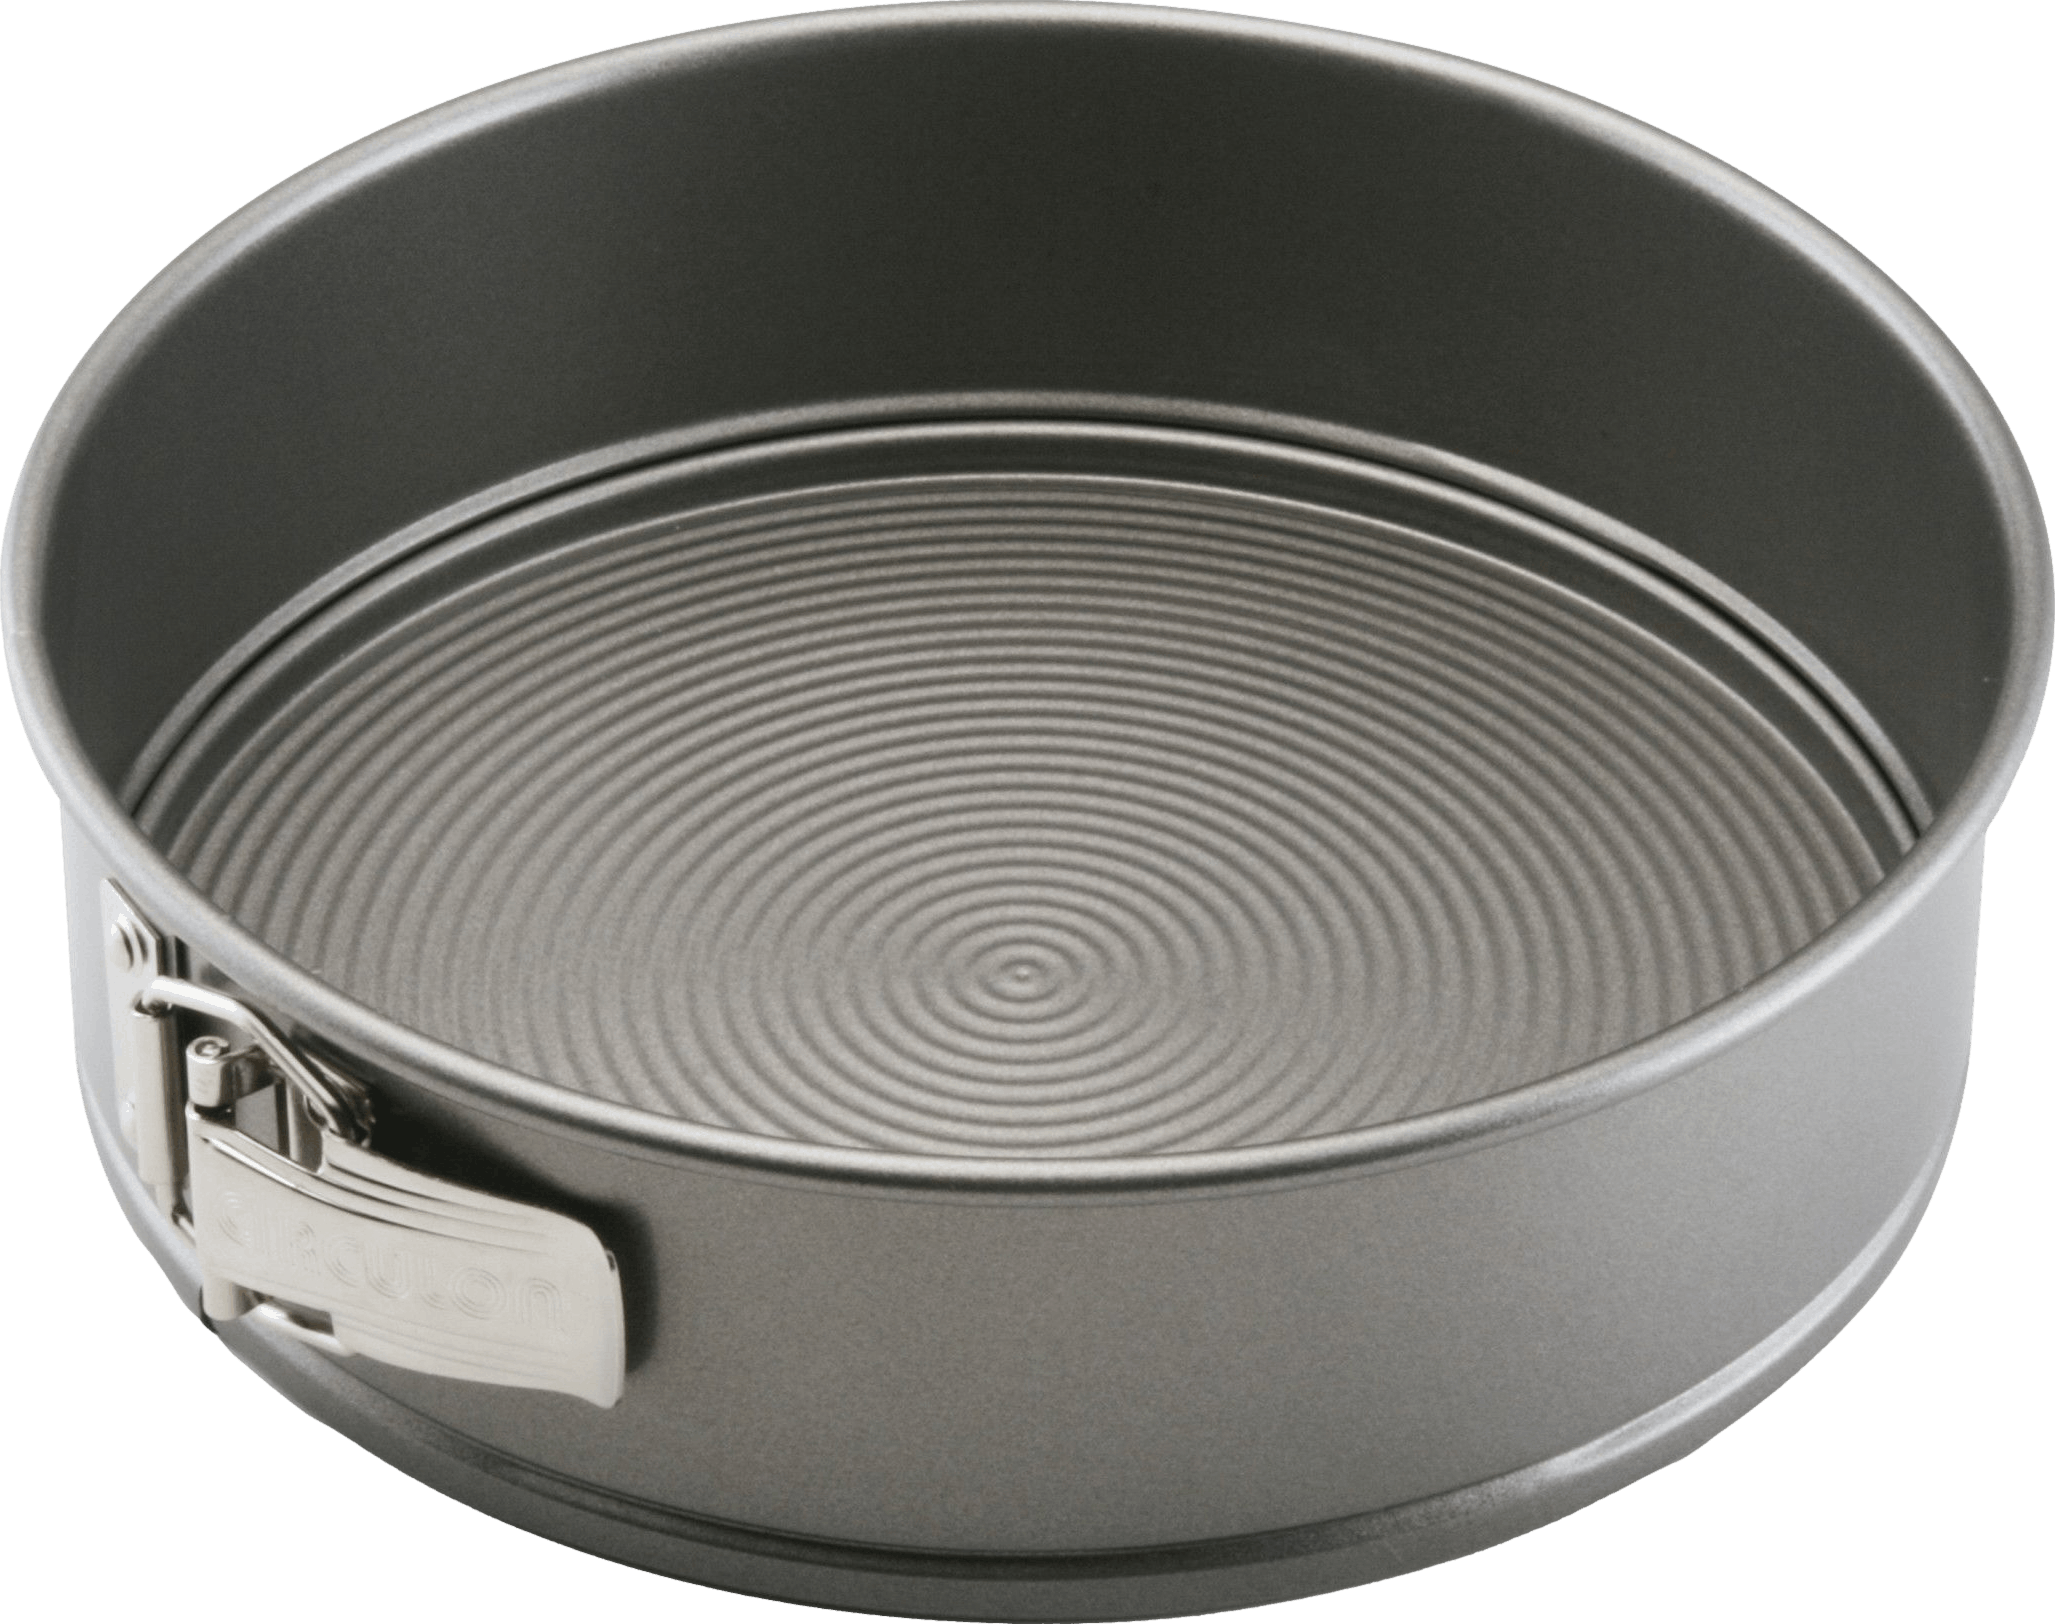 Springform Pan 101: What is a Springform Pan and How Do You Use It